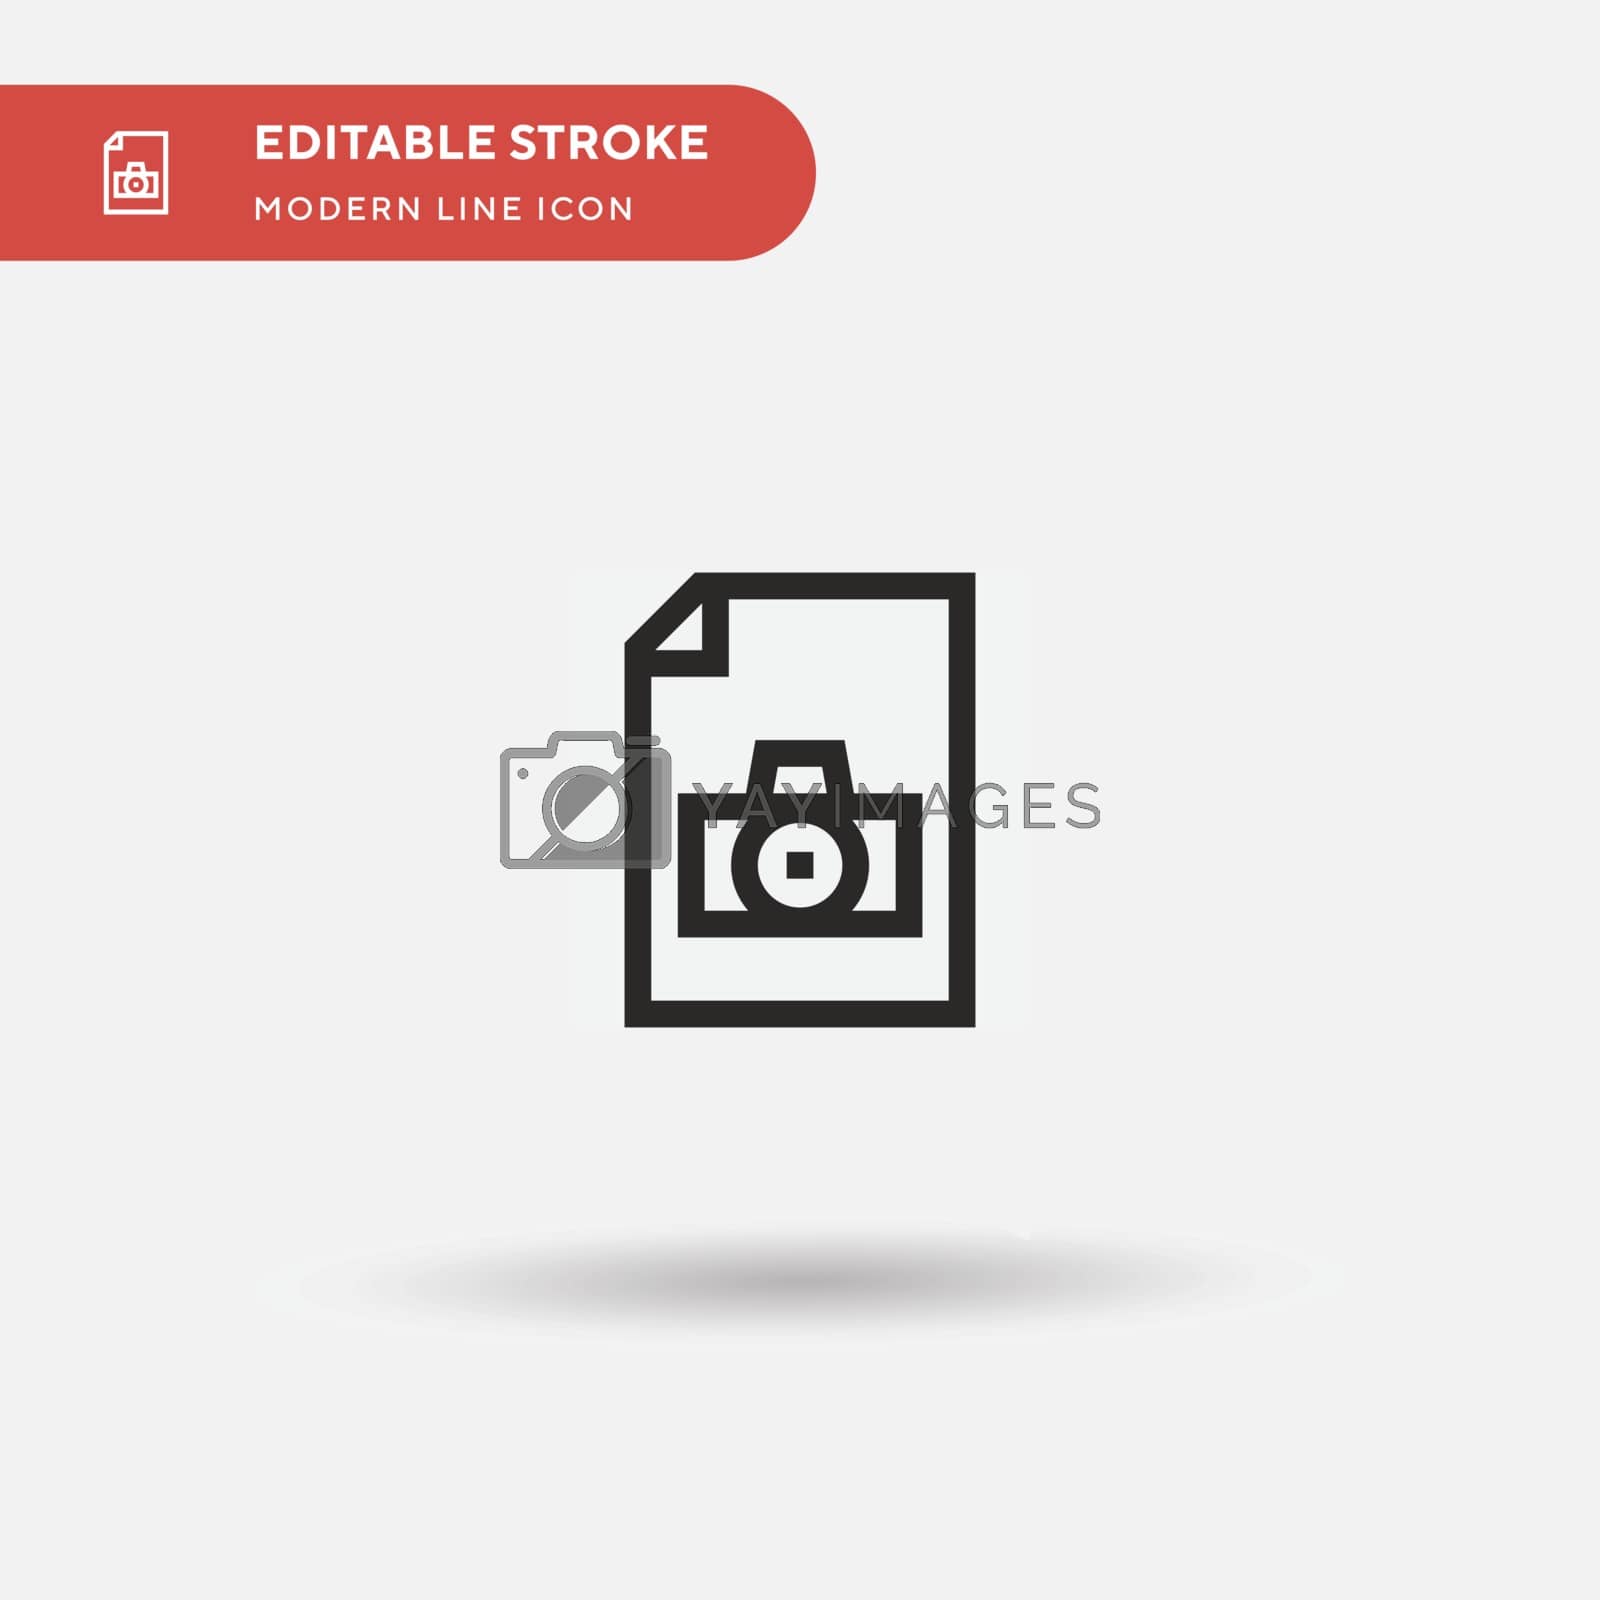 Royalty free image of Image File Simple vector icon. Illustration symbol design templa by guapoo